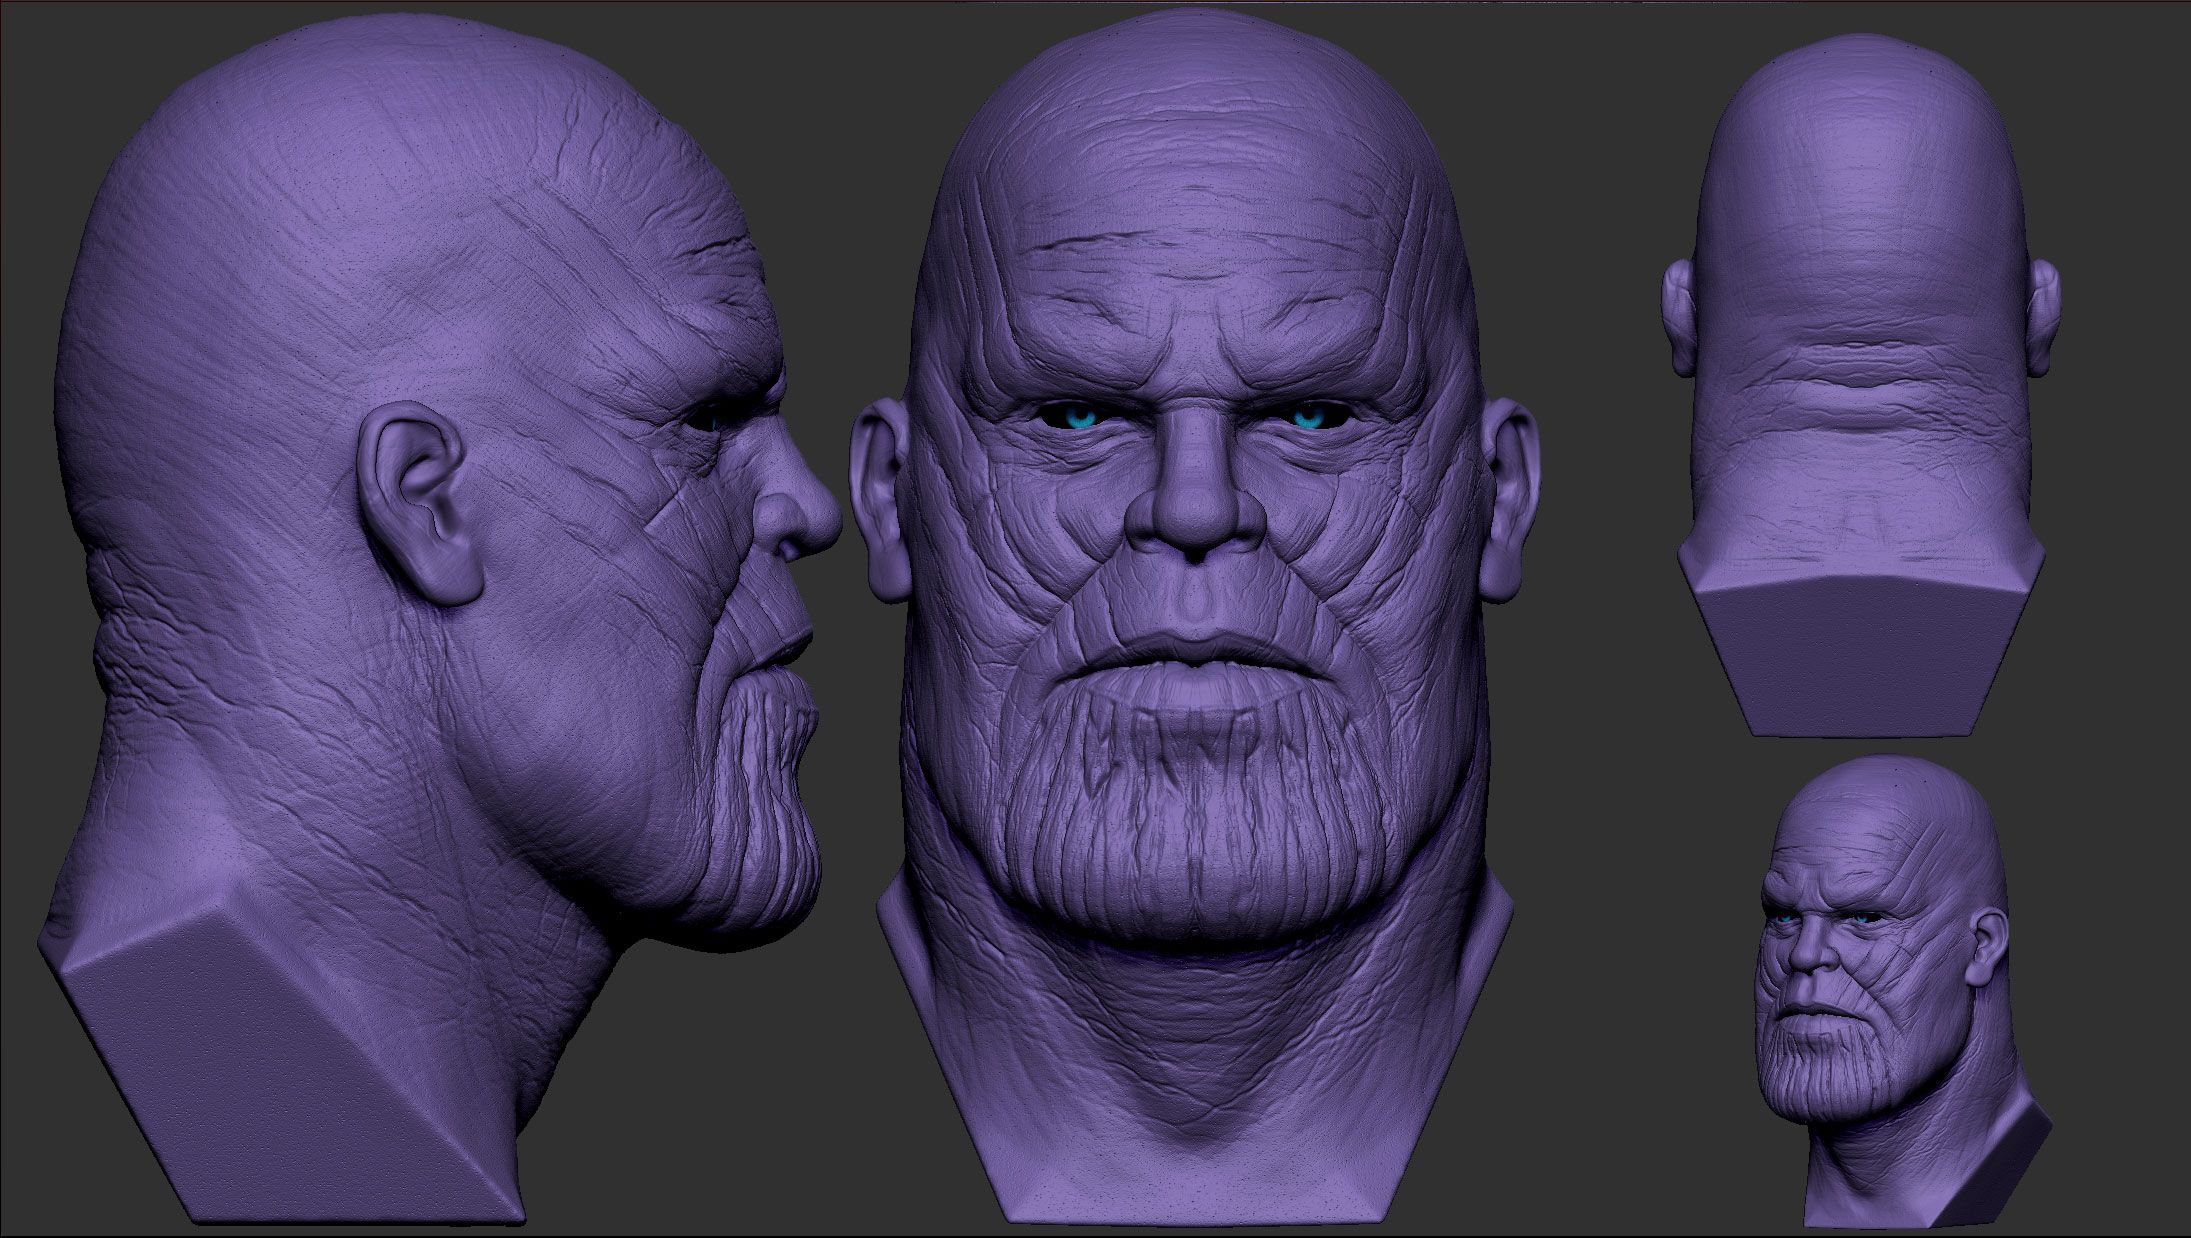 Image result for thanos face orthographic views. Thanos face, 3D face, Cg art